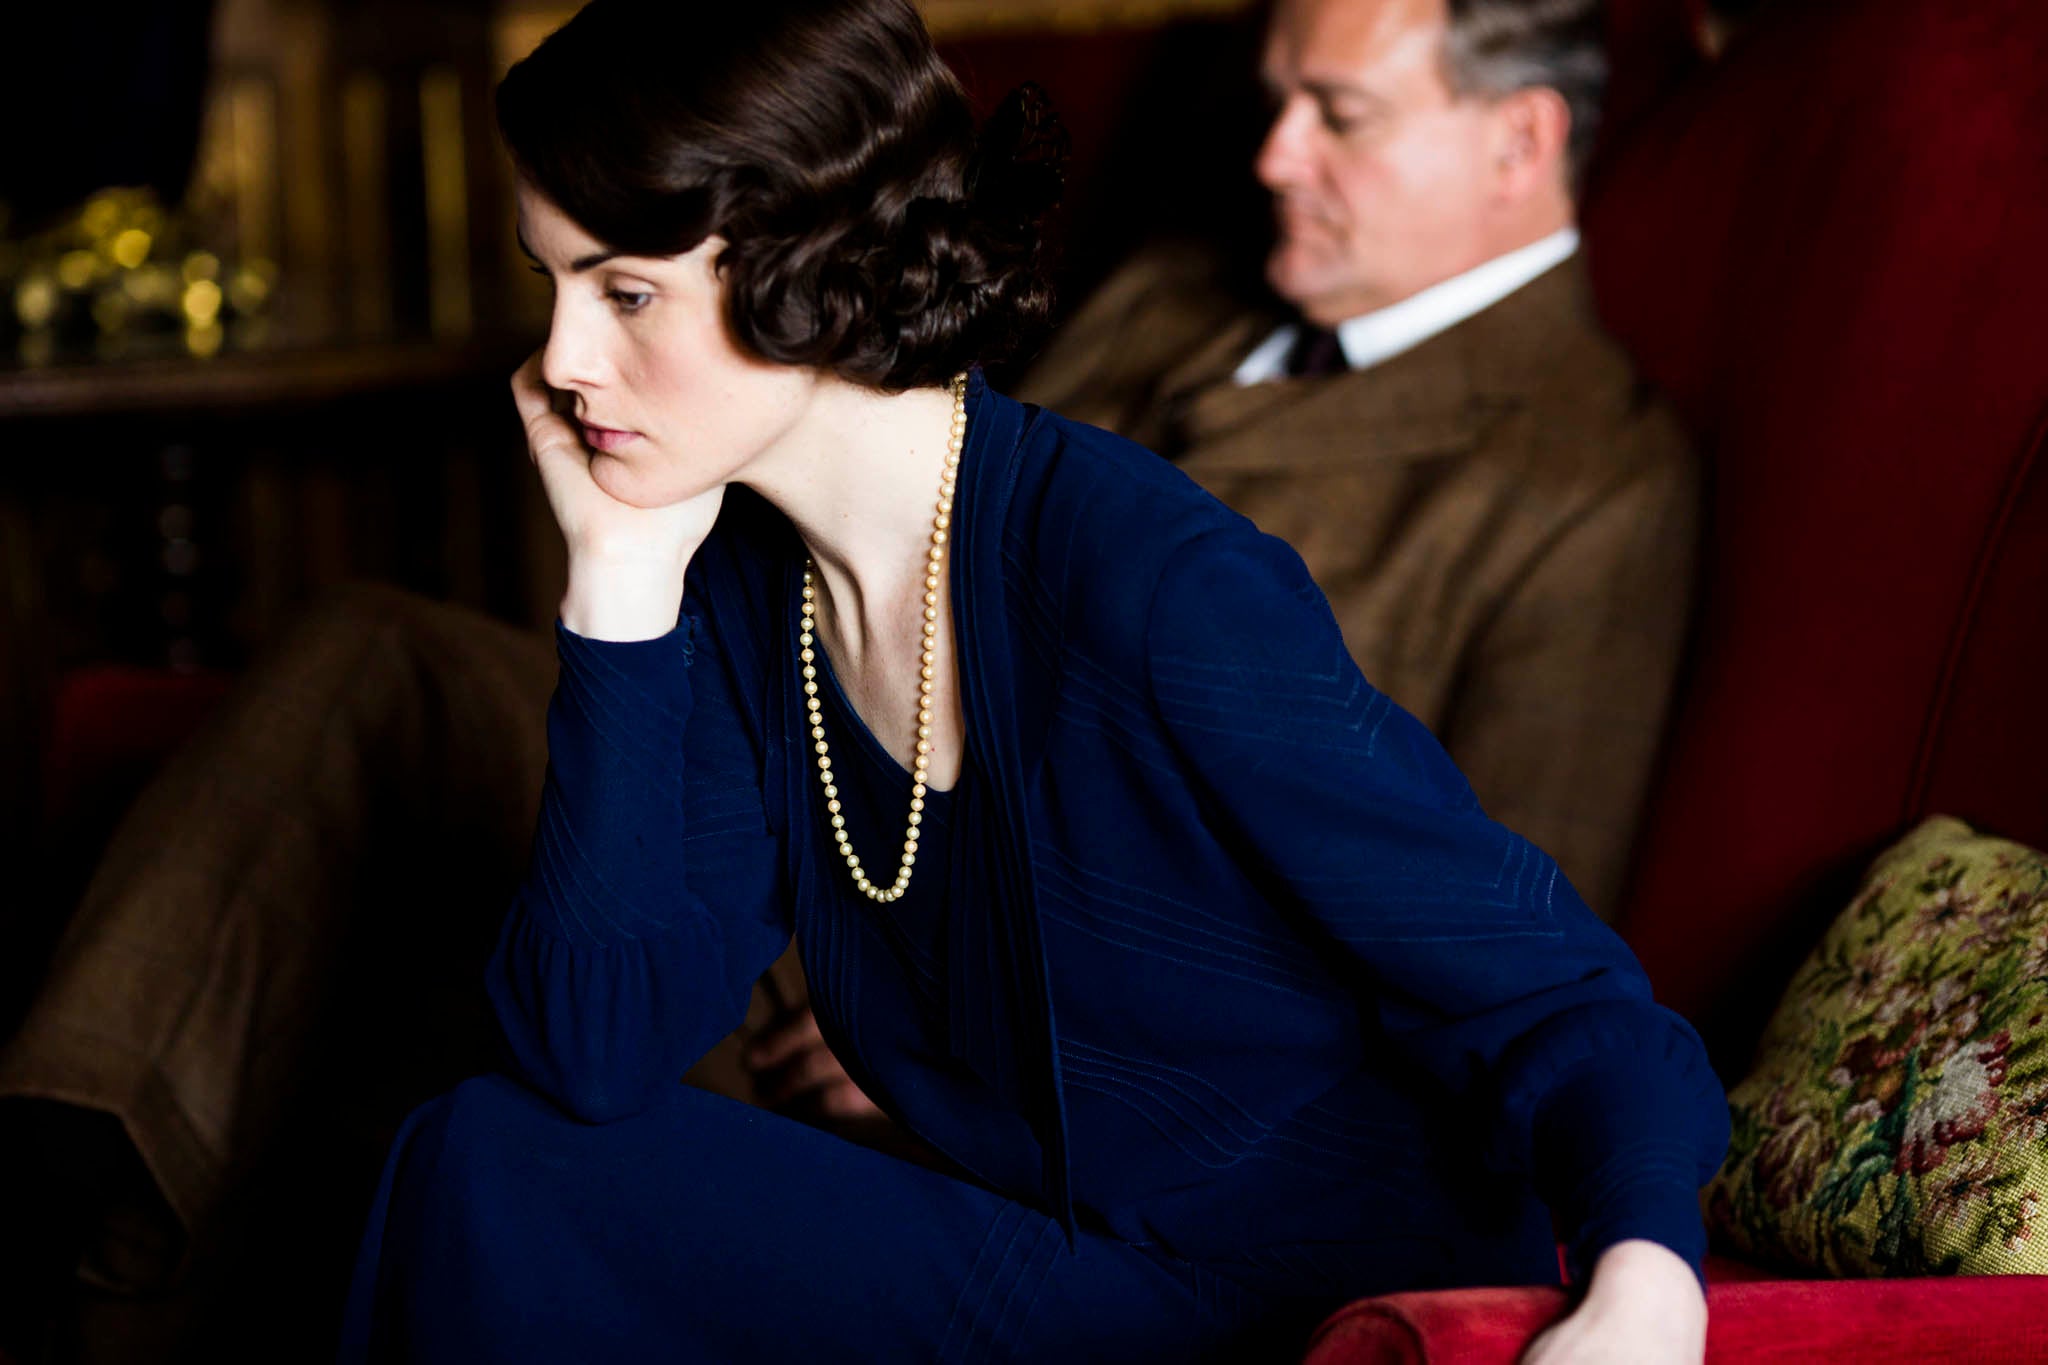 A sullen Lady Mary sits next to her father Robert, Earl of Grantham